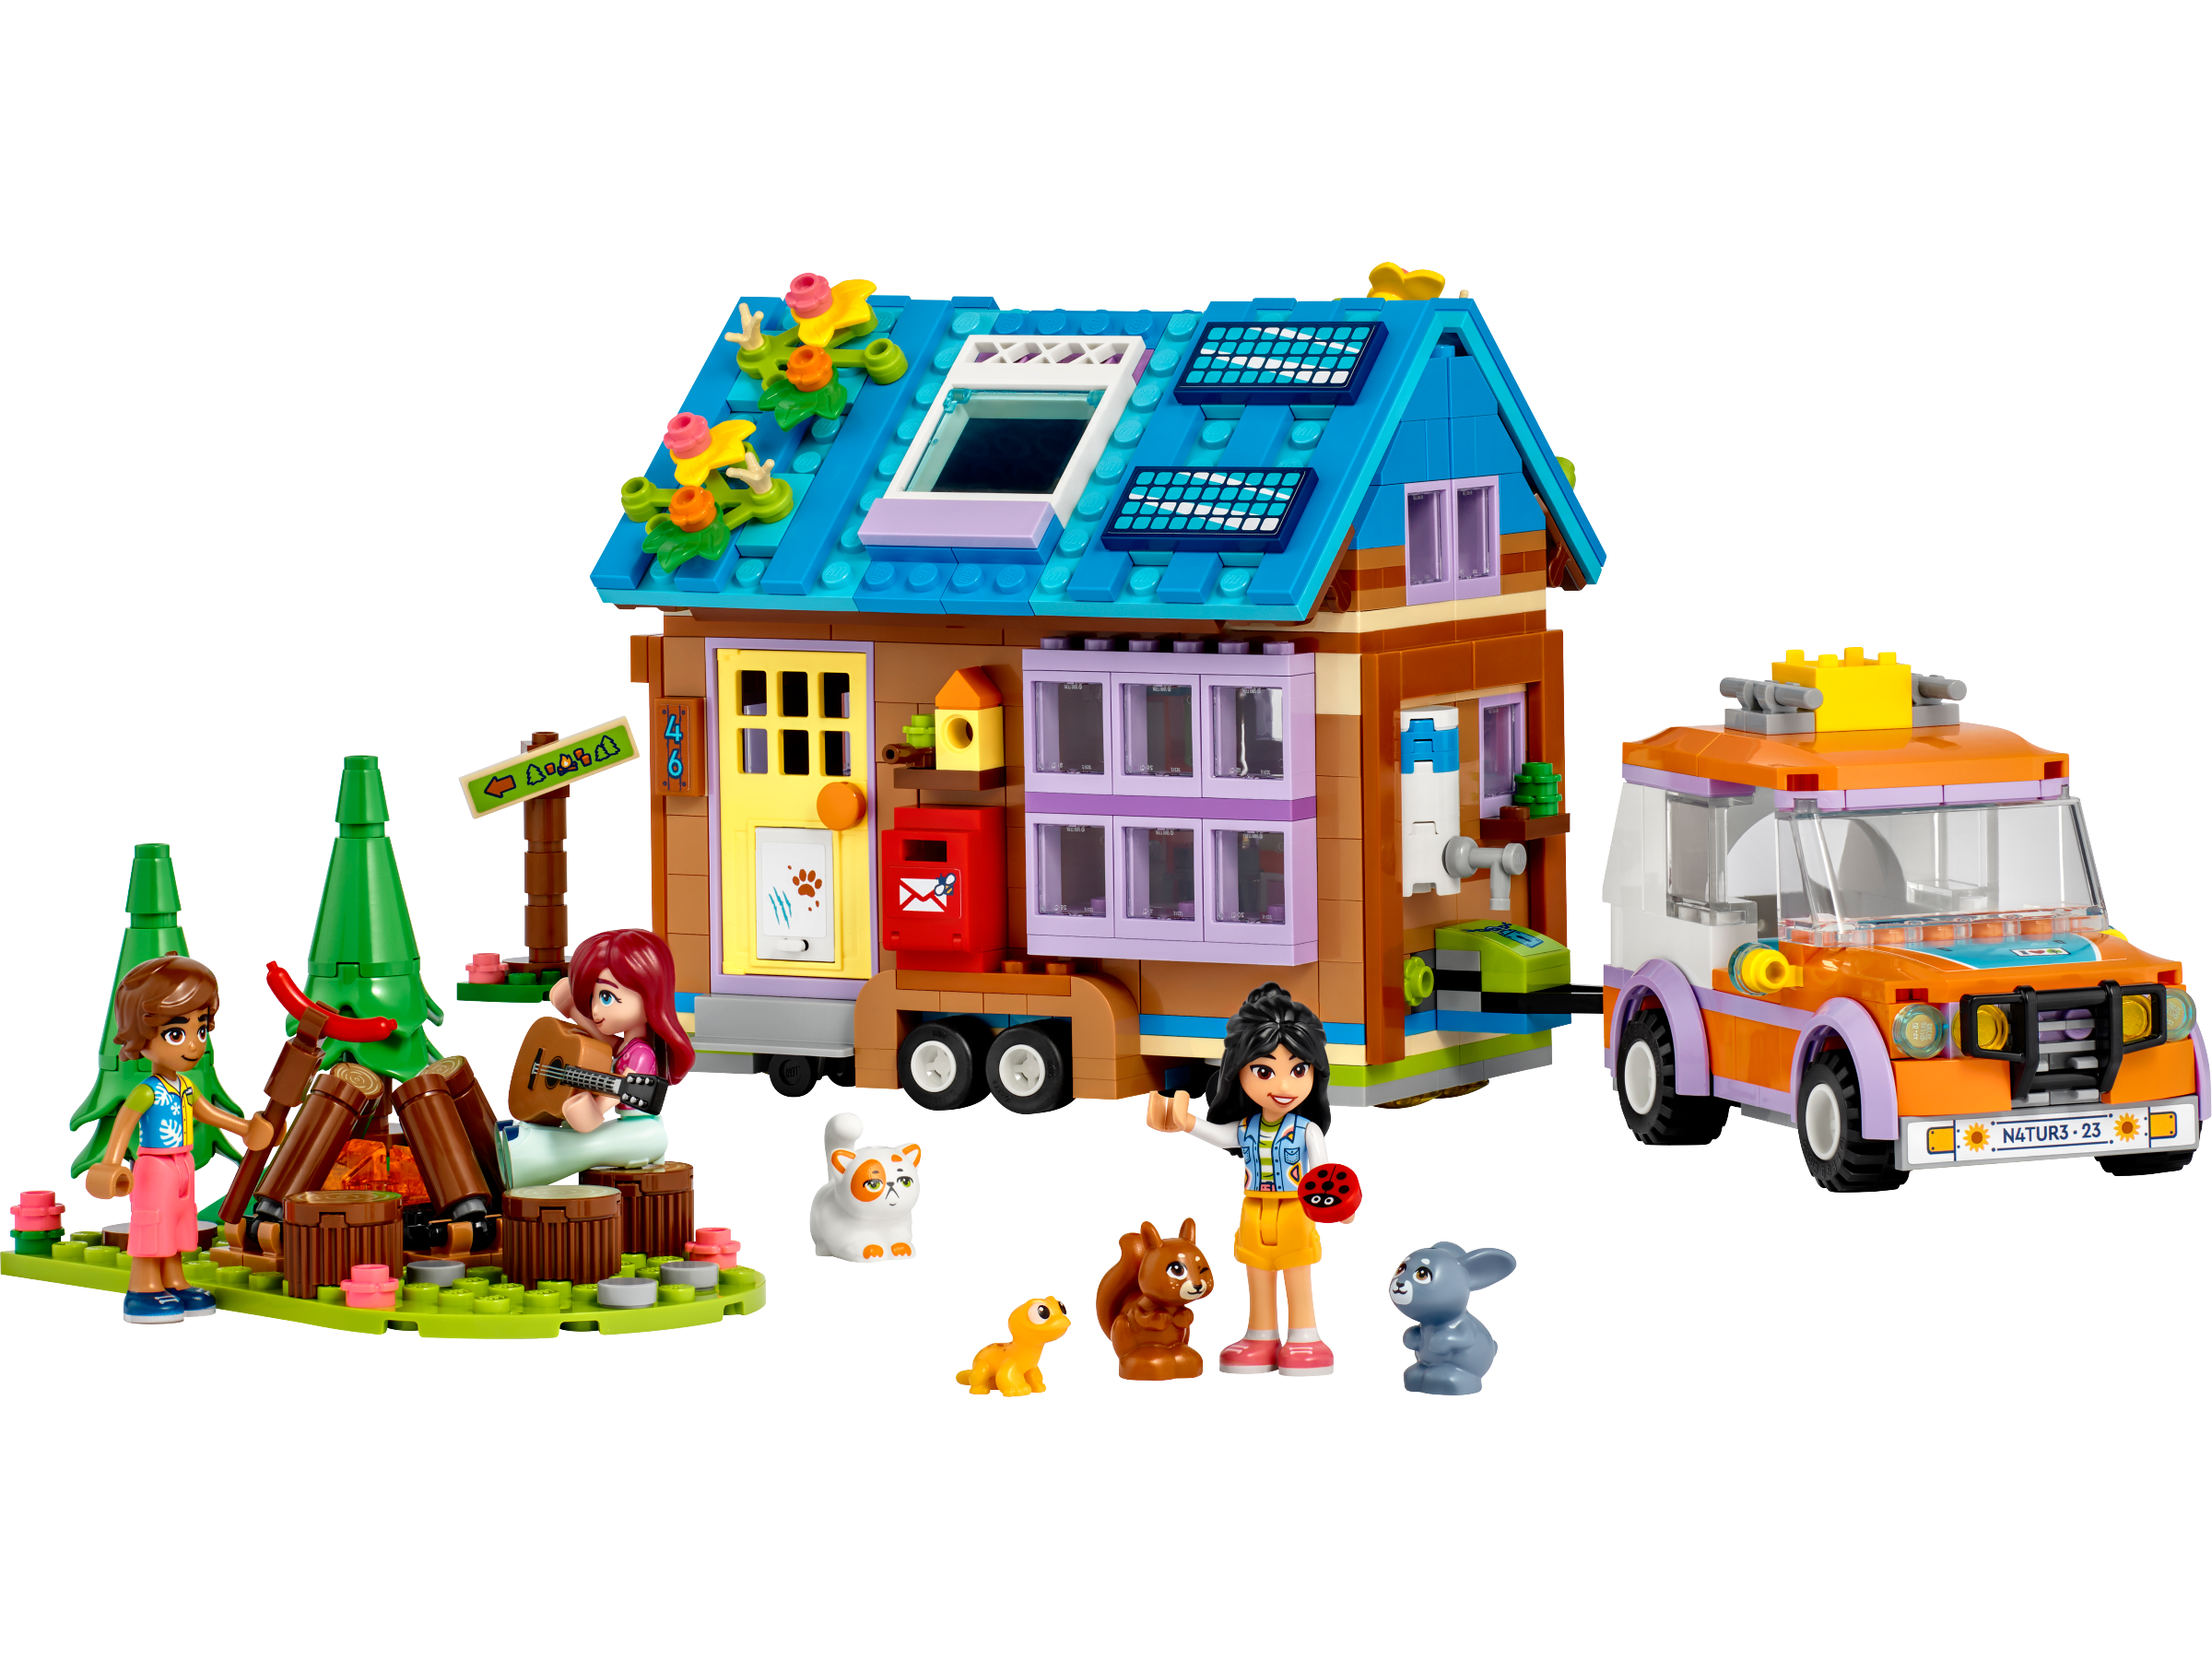 LEGO Friends: Mobile Tiny House